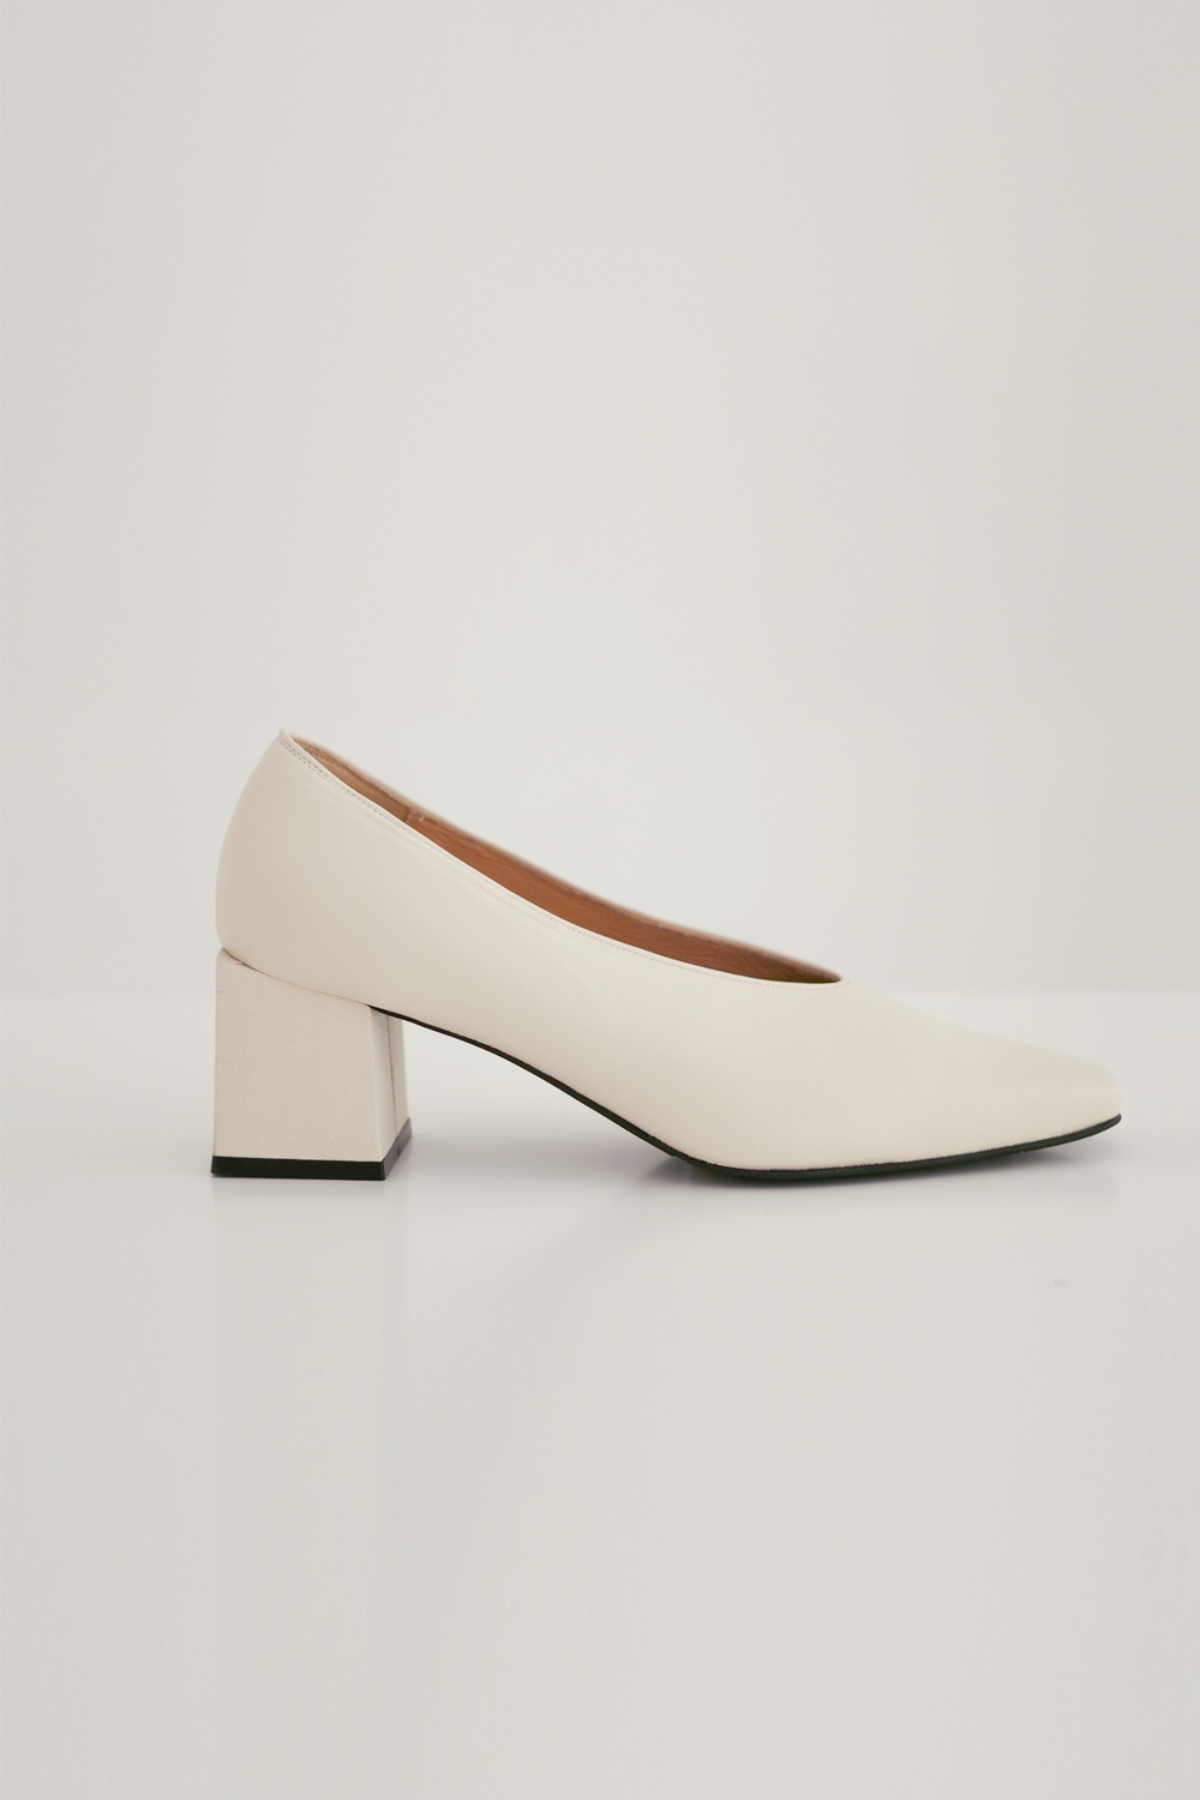 ANTHÈSE venica square middle heel, ivory 당일발송